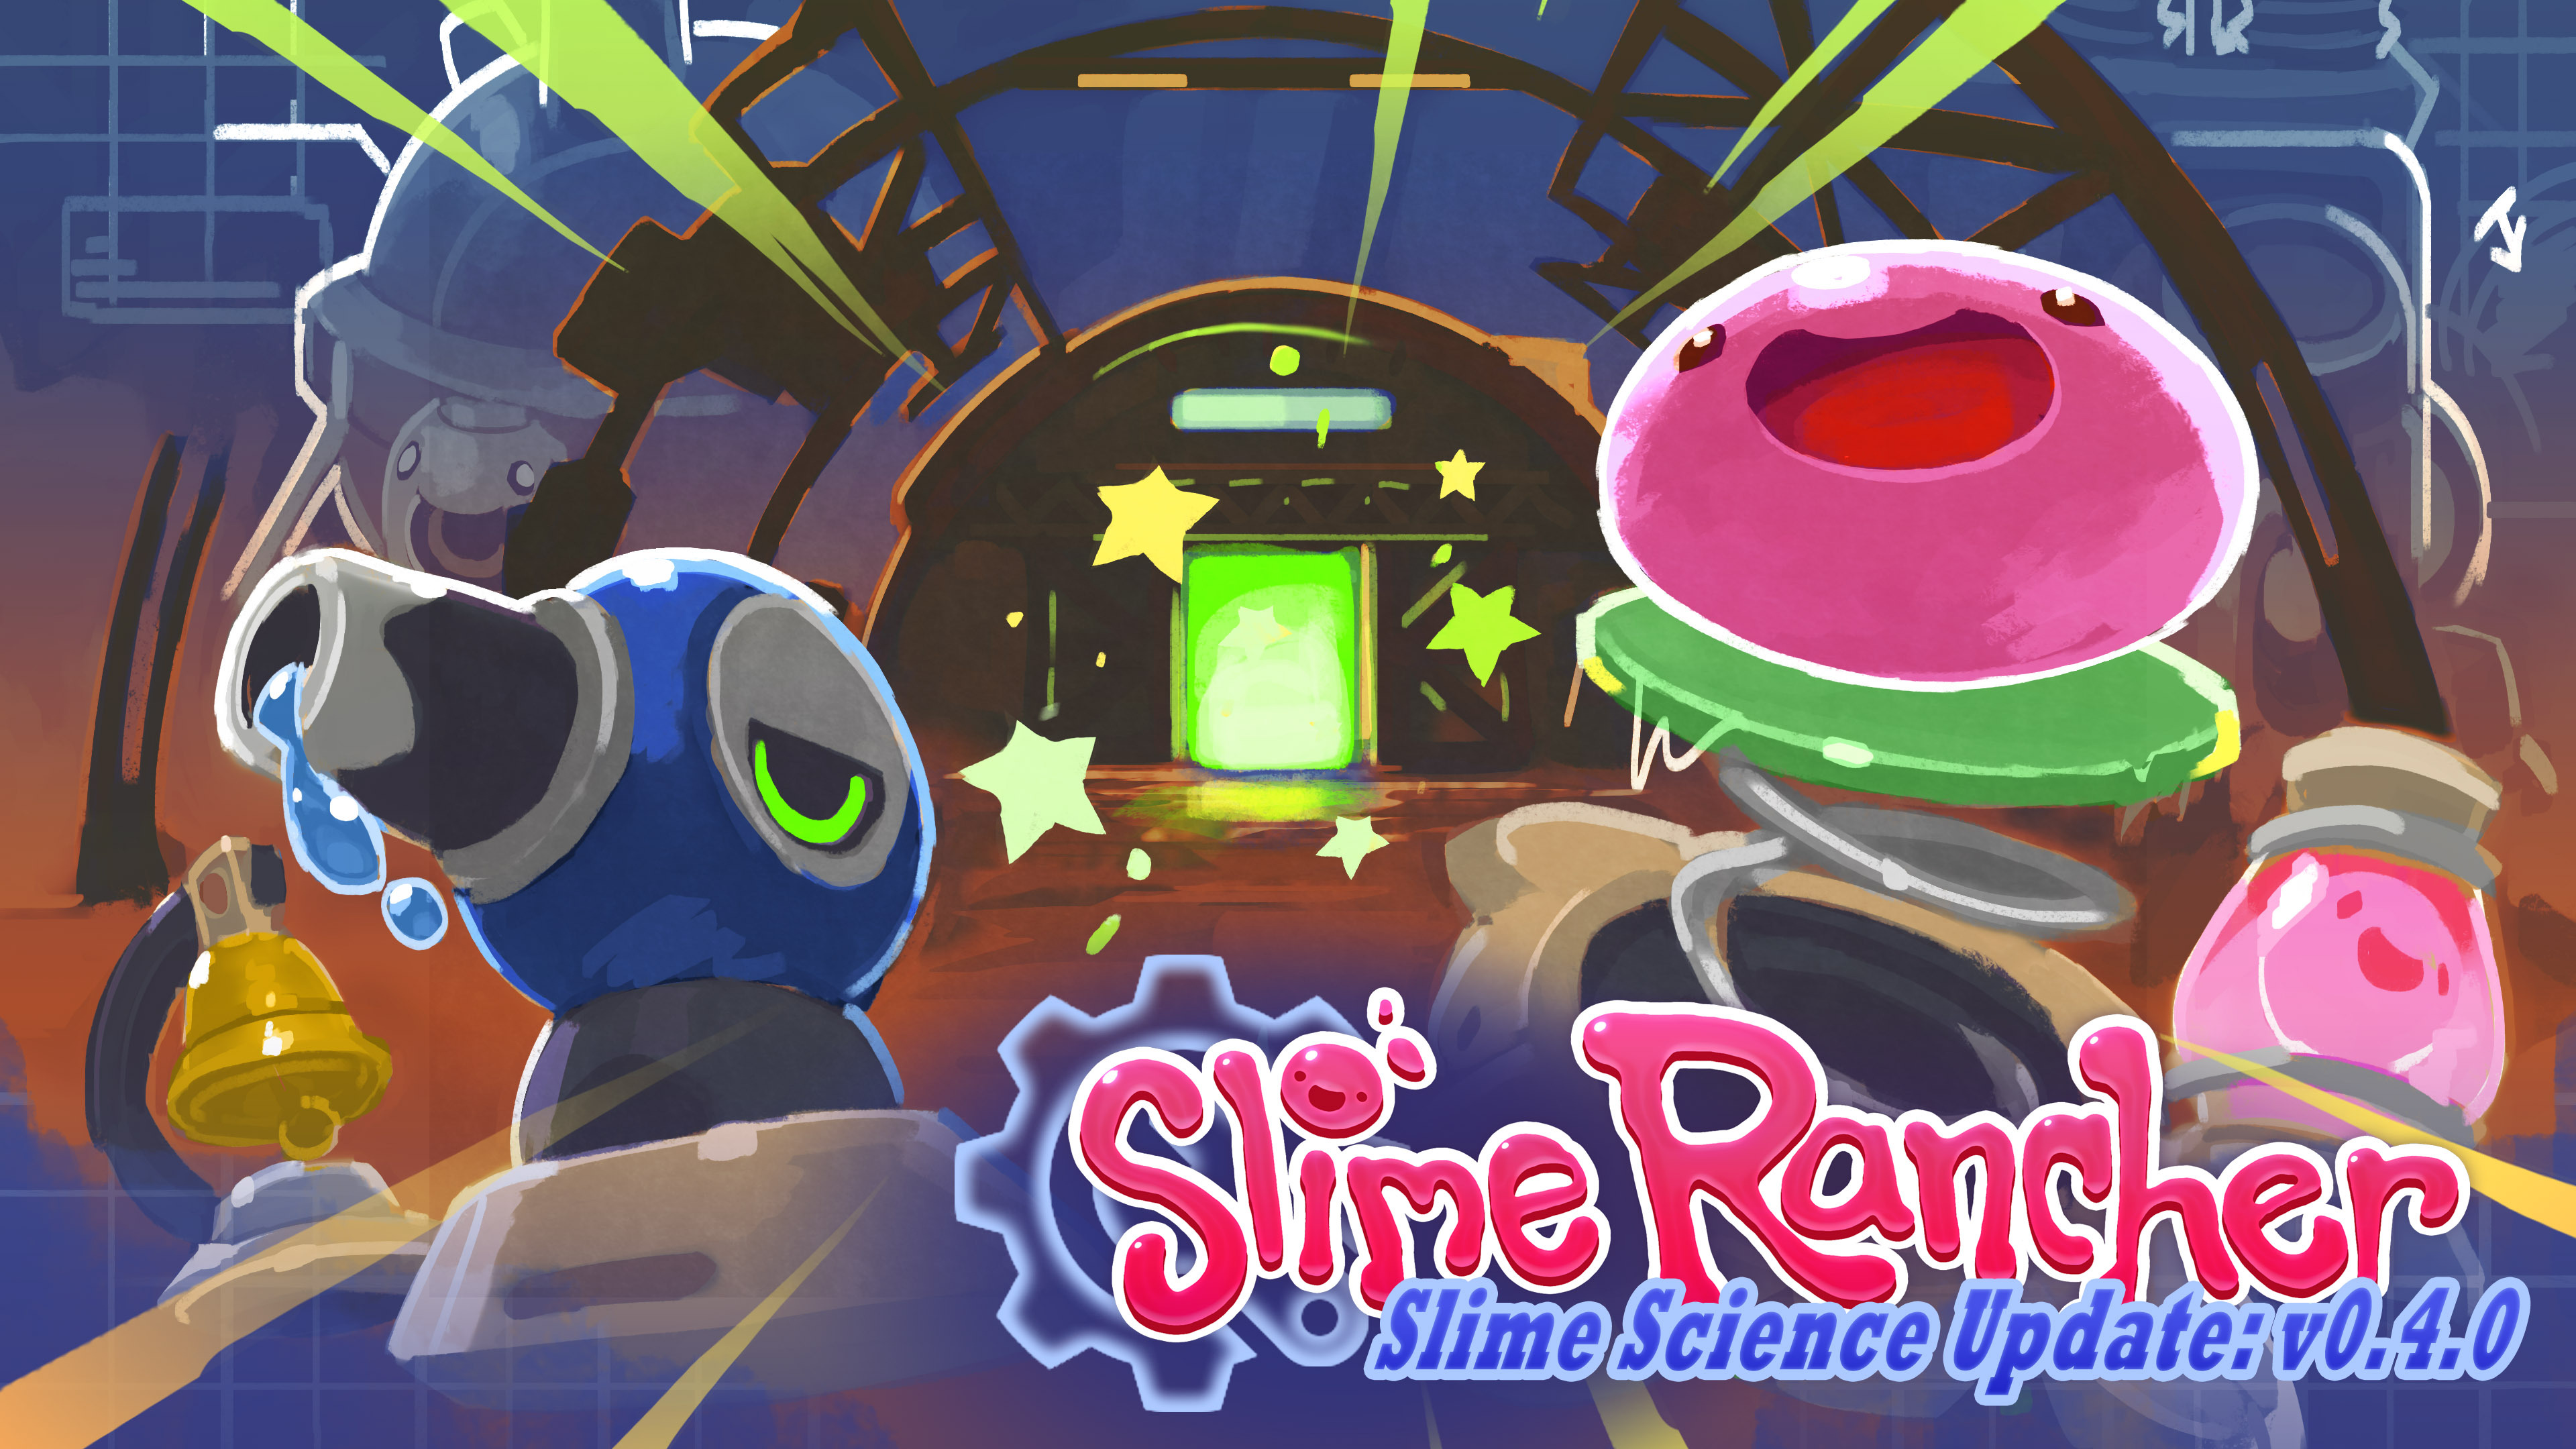 What We Know About The Slime Rancher Film Adaptation